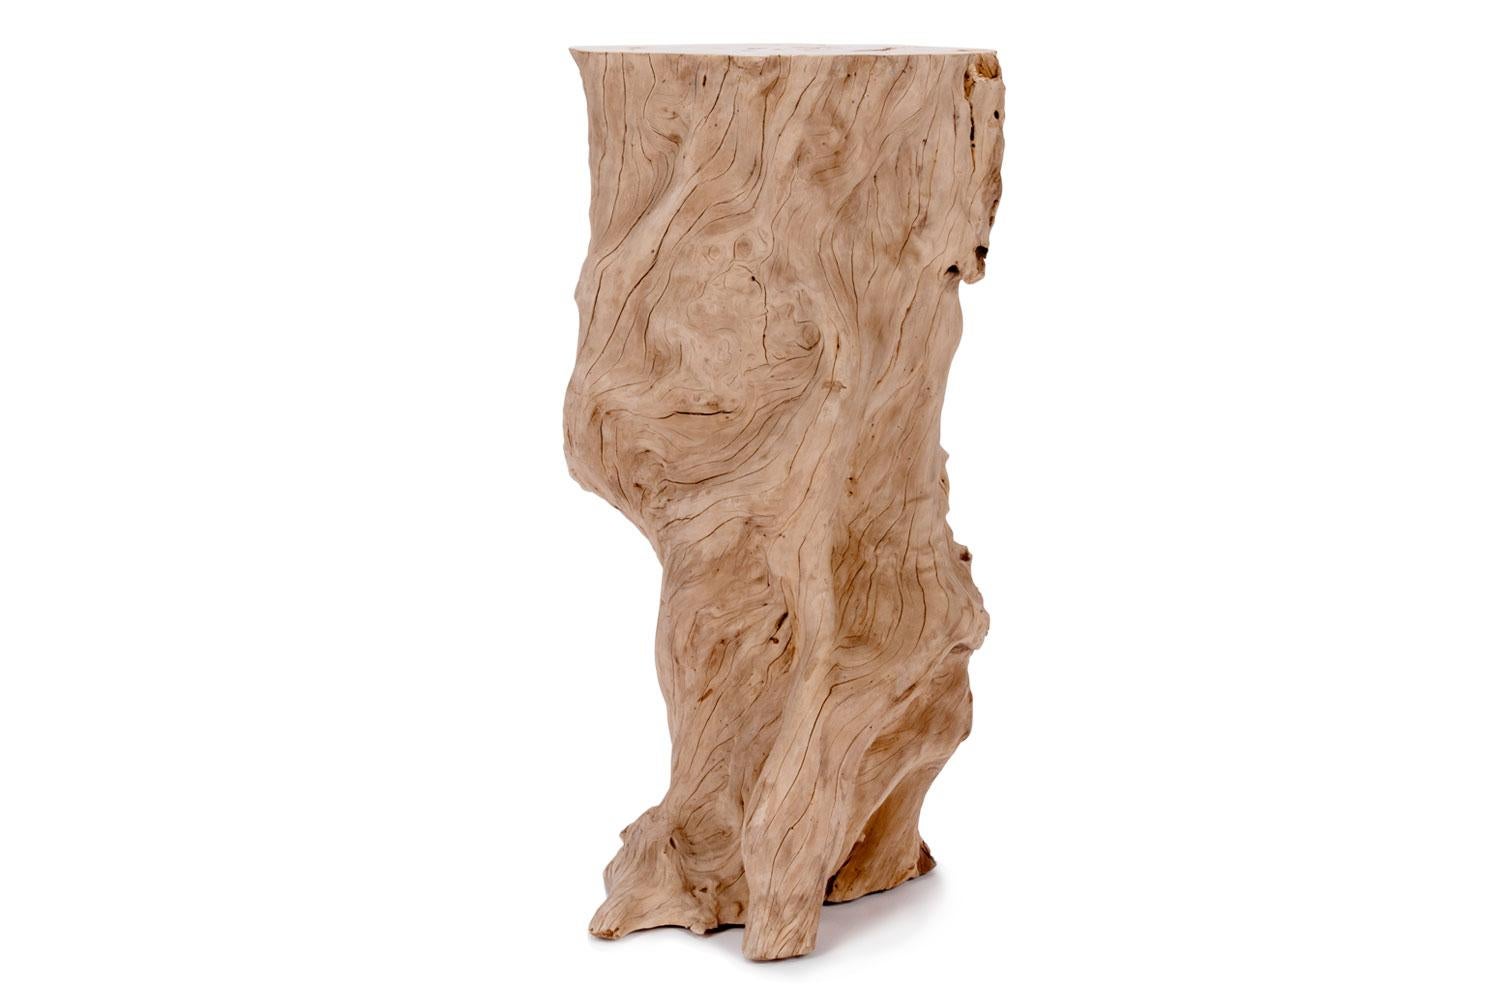 These solid Plumeria wood pedestals are one of a kind and perfect for displaying art or planters and also make a beautiful sculptural statement without displayed items. Work wonderfully as an organic, hand-made element in modern spaces.

Each